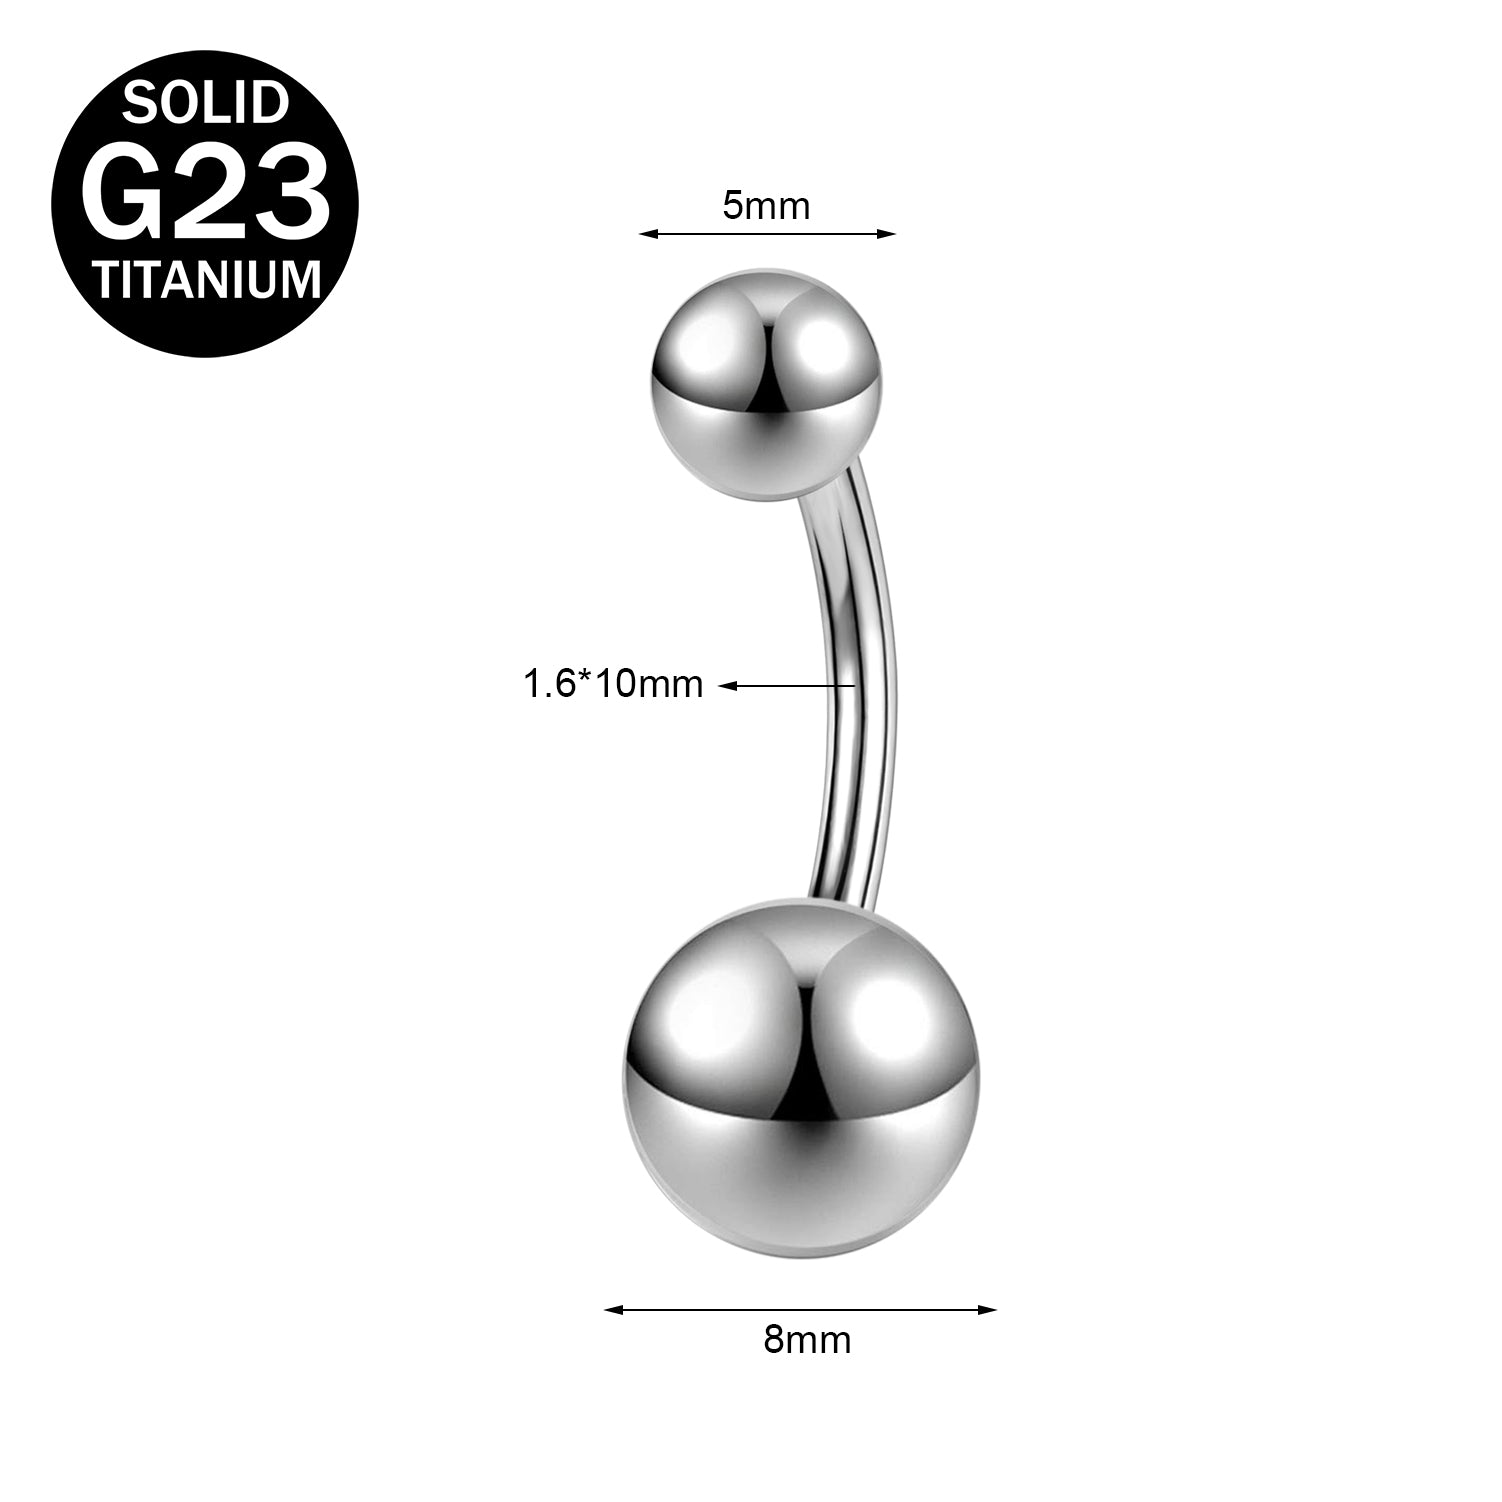 14g-g23-titanium-belly-button-rings-double-ball-navel-piercing-jewelry